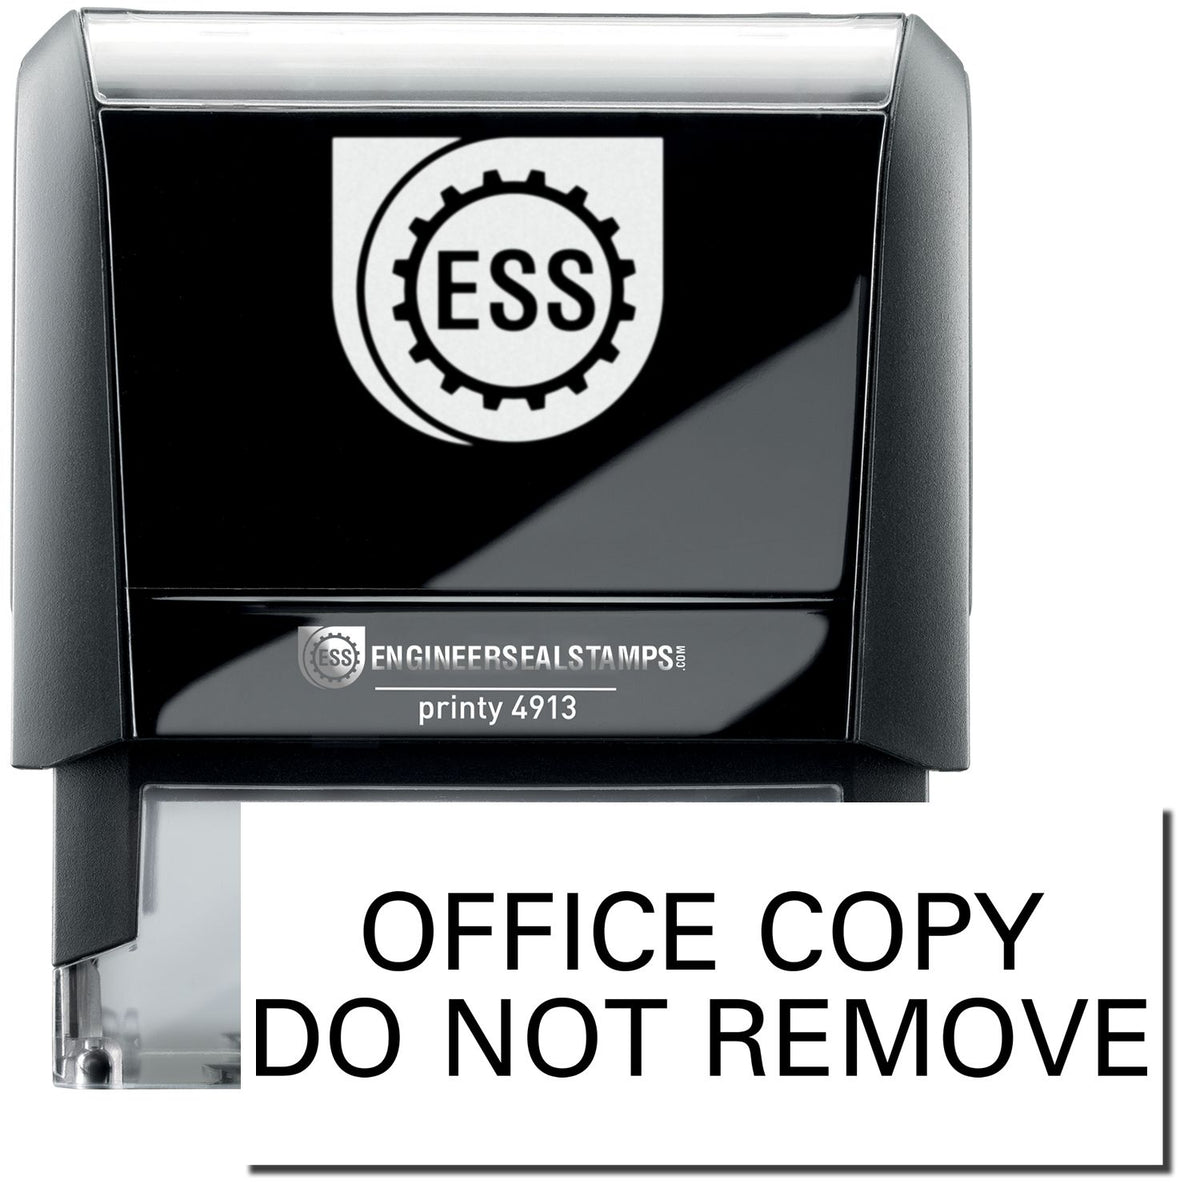 A self-inking stamp with a stamped image showing how the text &quot;OFFICE COPY DO NOT REMOVE&quot; in a large font is displayed by it after stamping.